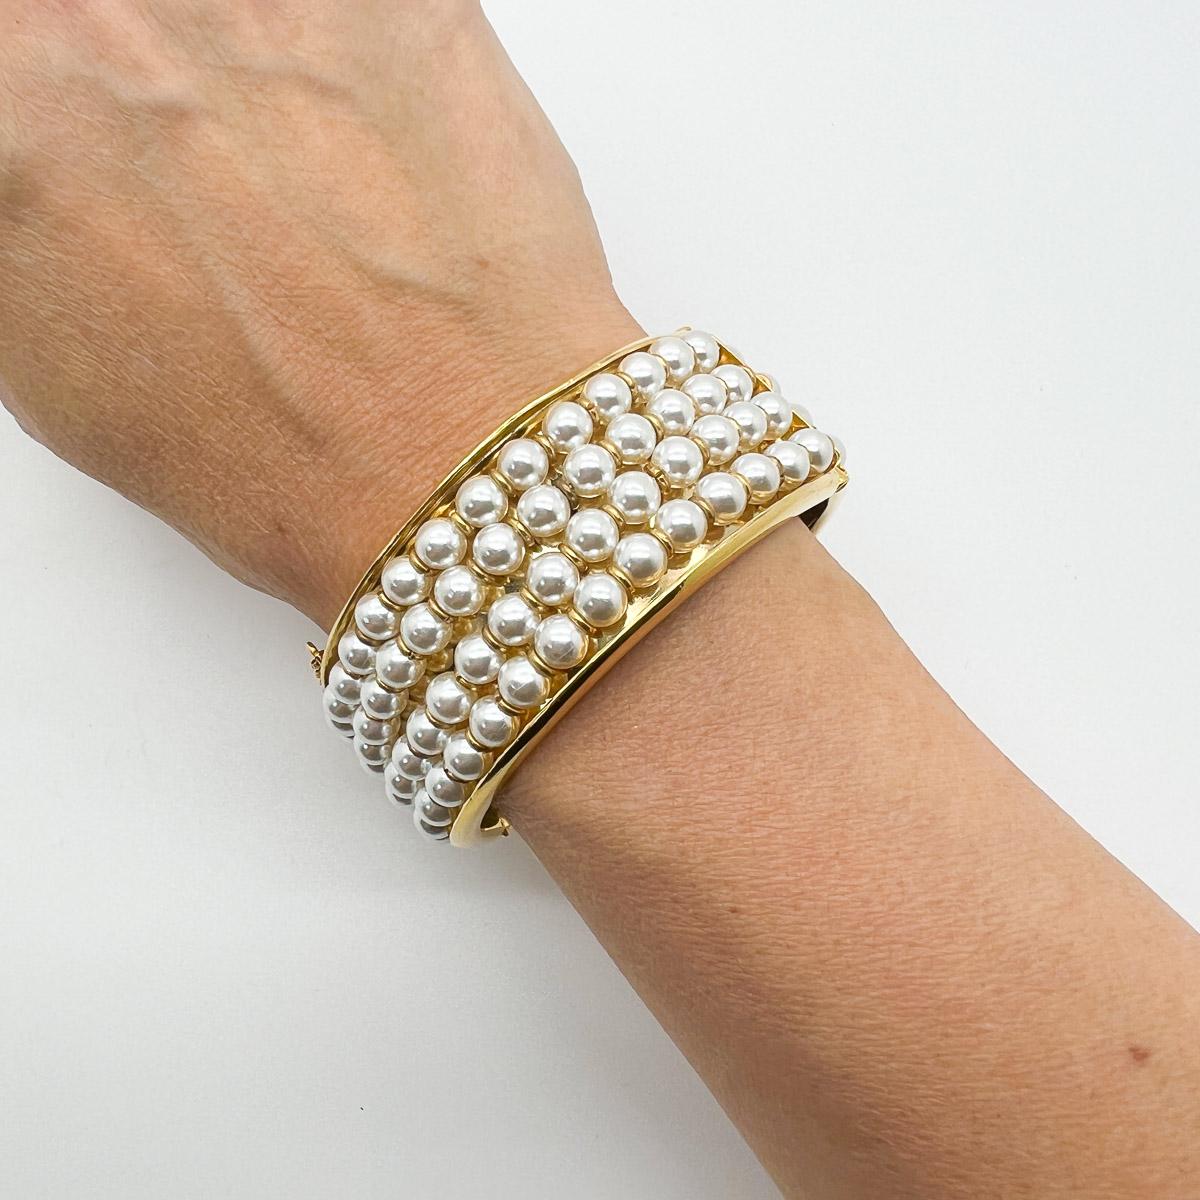 A dramatic vintage Whole Pearl Bangle. A broad band adorned with heaps of whole pearls. The chicest statement adornment.

An unsigned beauty. A rare treasure. Just because a jewel doesn’t carry a designer name, doesn’t mean it isn't coveted. The